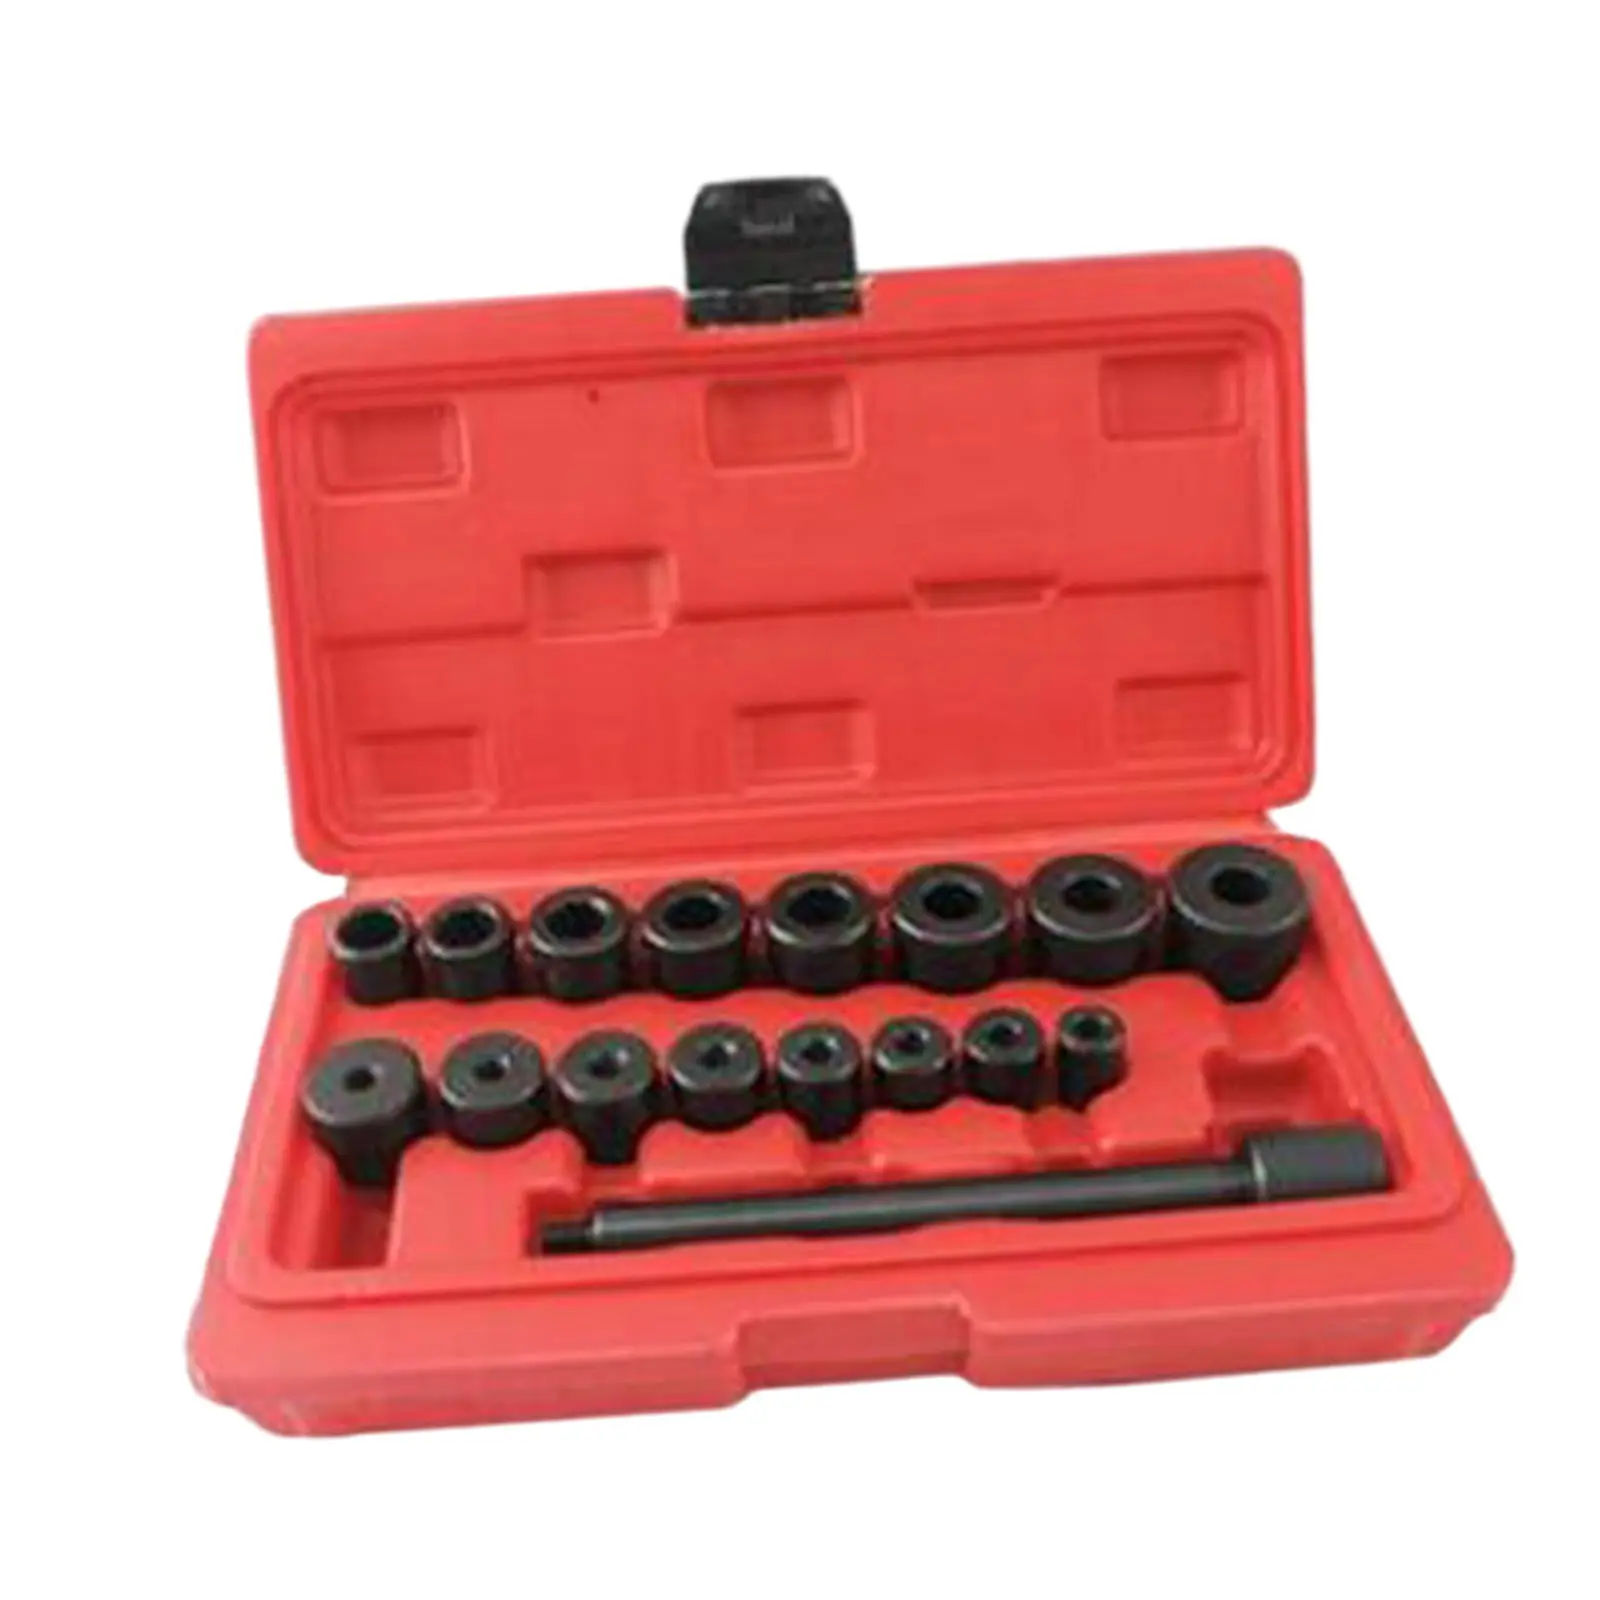 17Pcs/set Clutch Aligning Kit Installation Calibration Clutch Hole Clutch Drive Plate Aligning Tool for Car Truck Vehicles